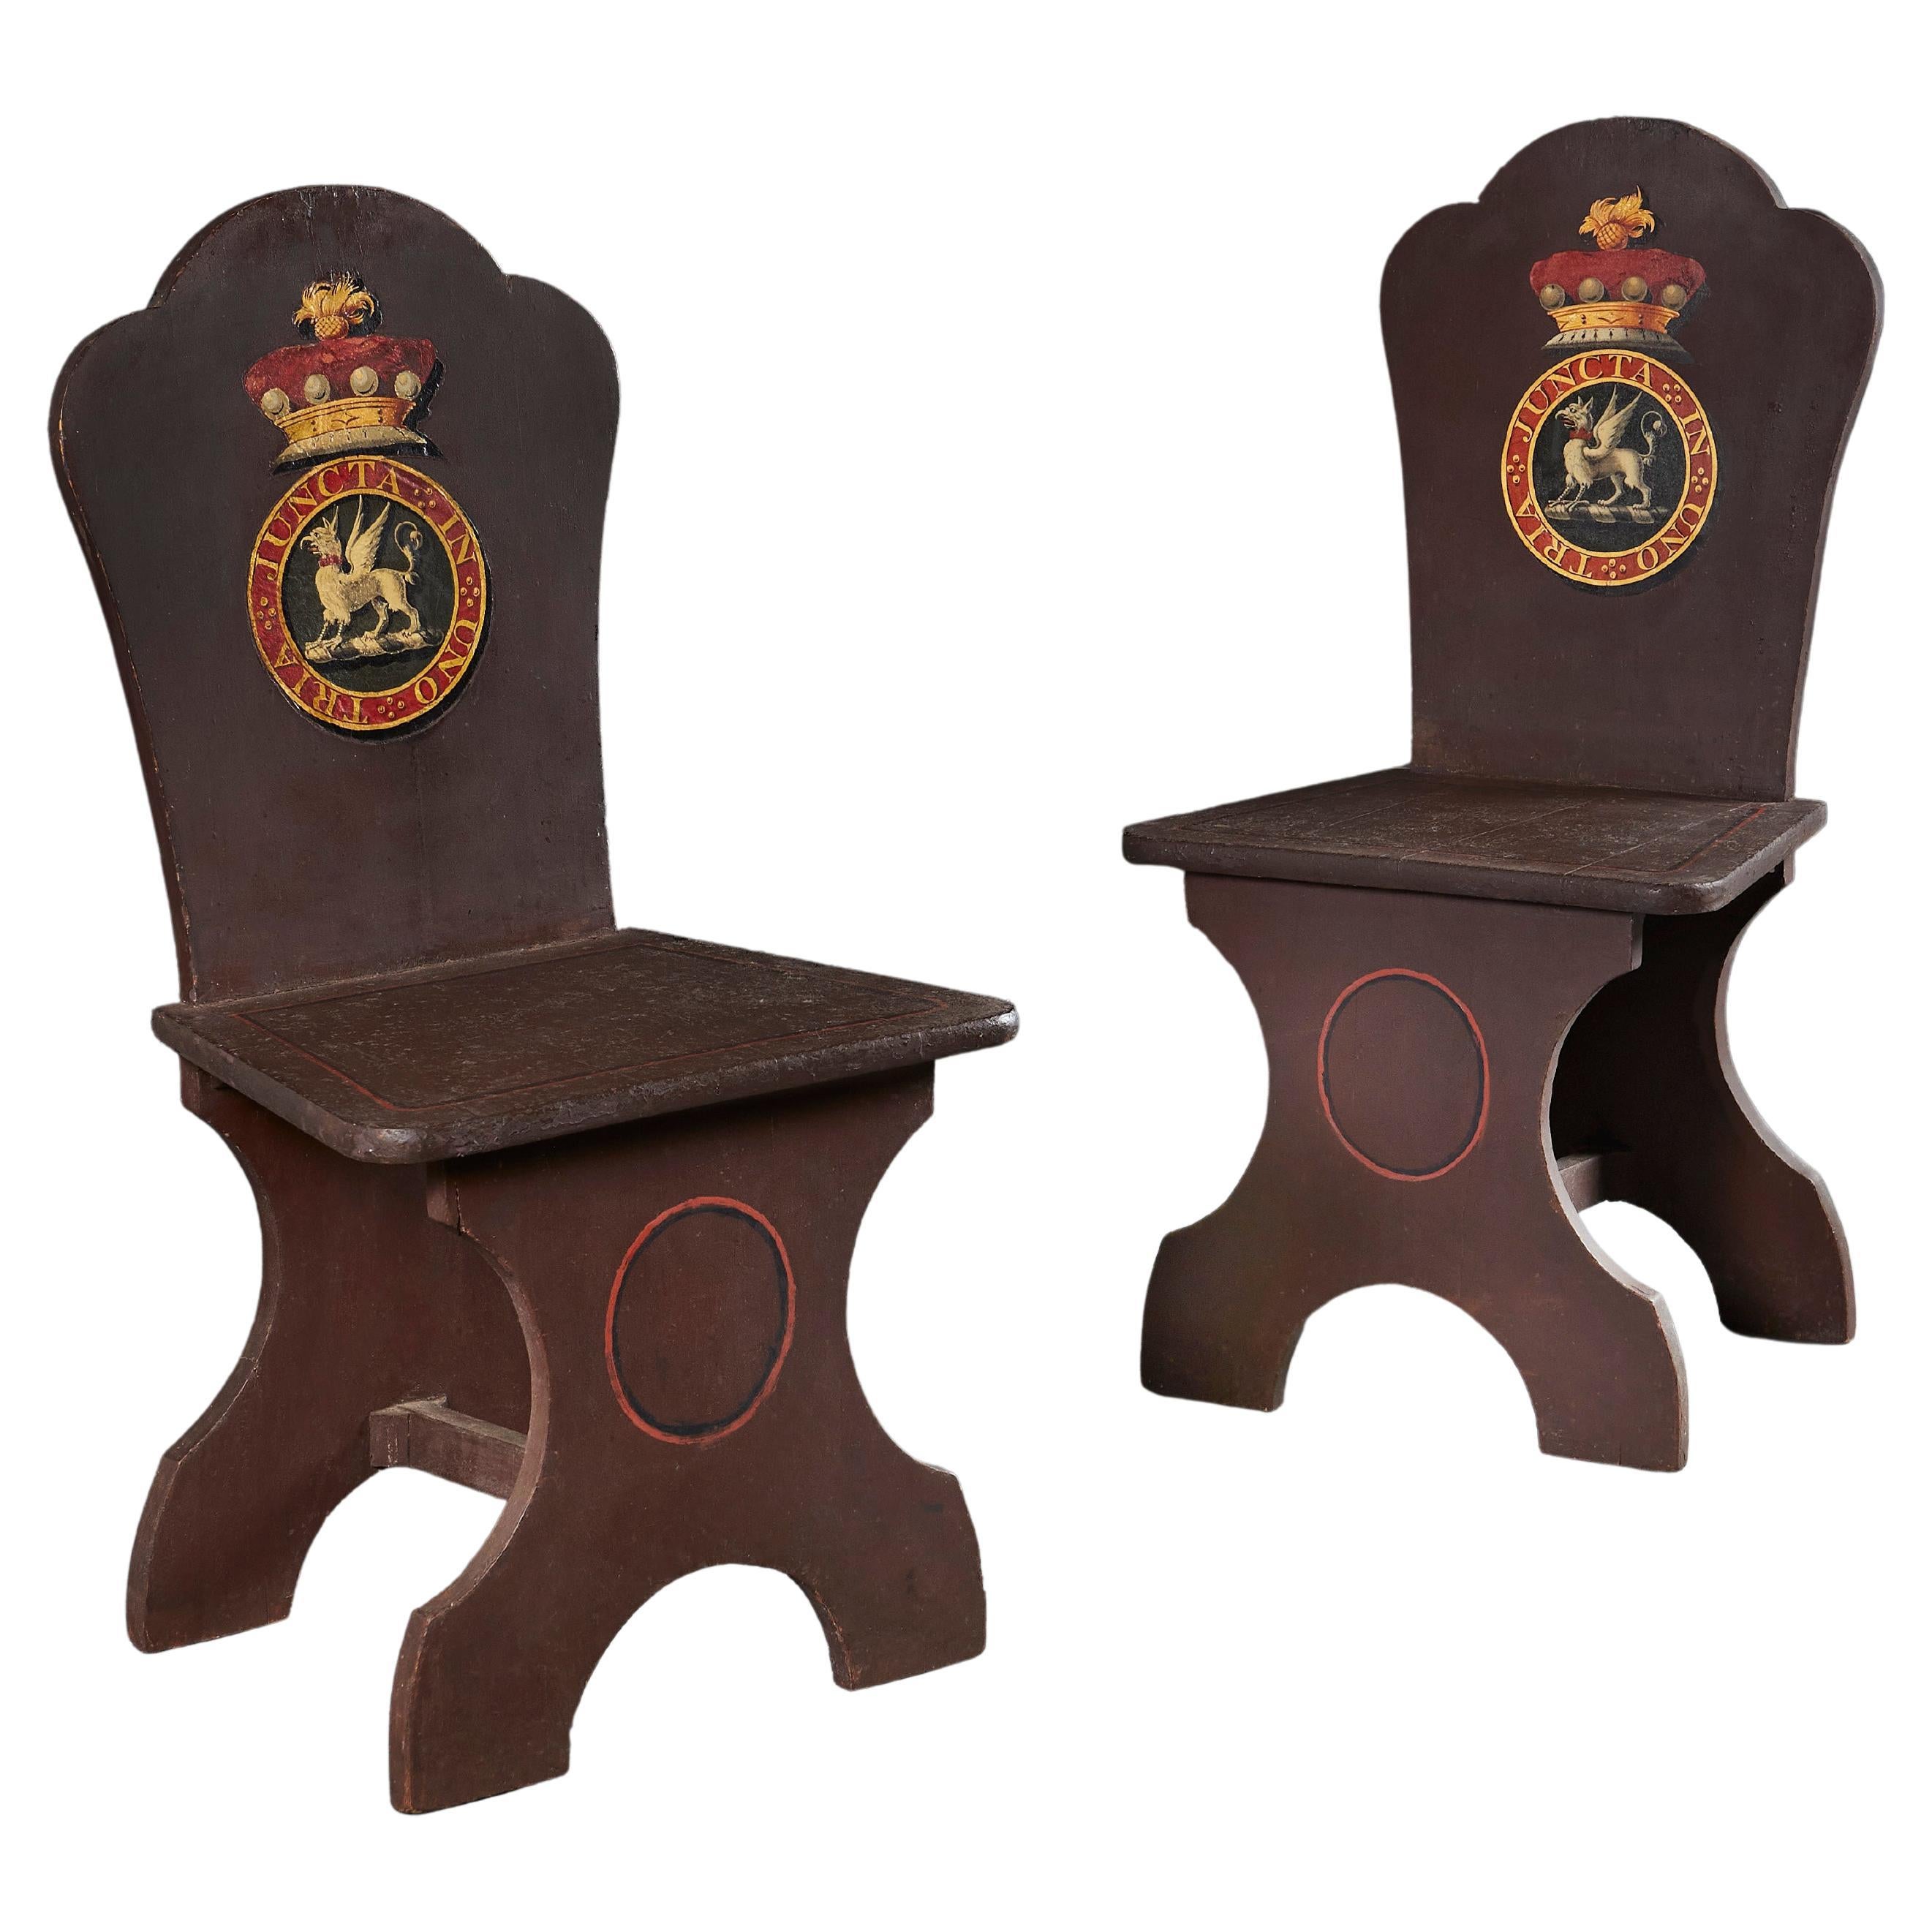 Pair of Mid-19th Century Painted Hall Chairs